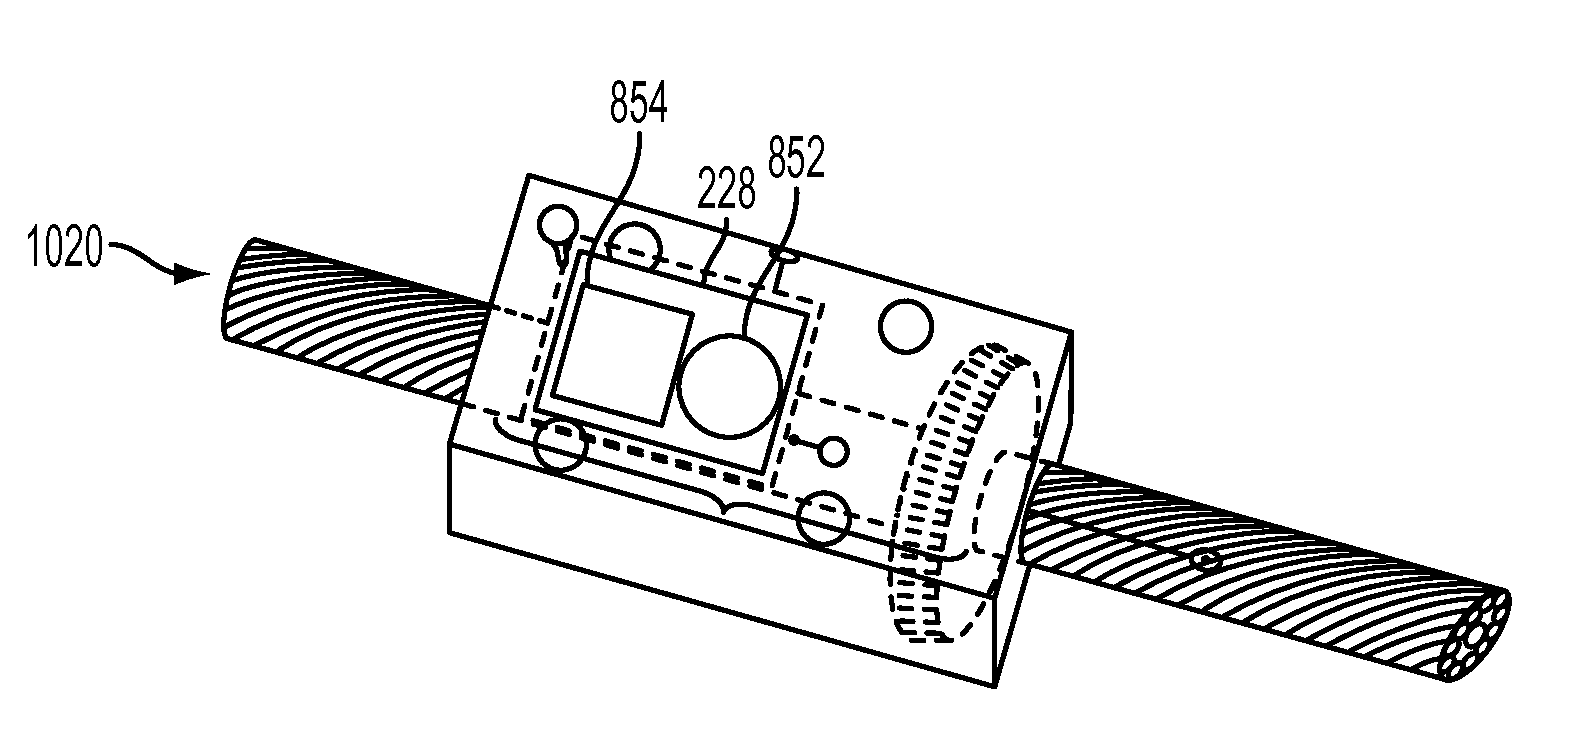 Apparatuses, systems and methods for detecting corona